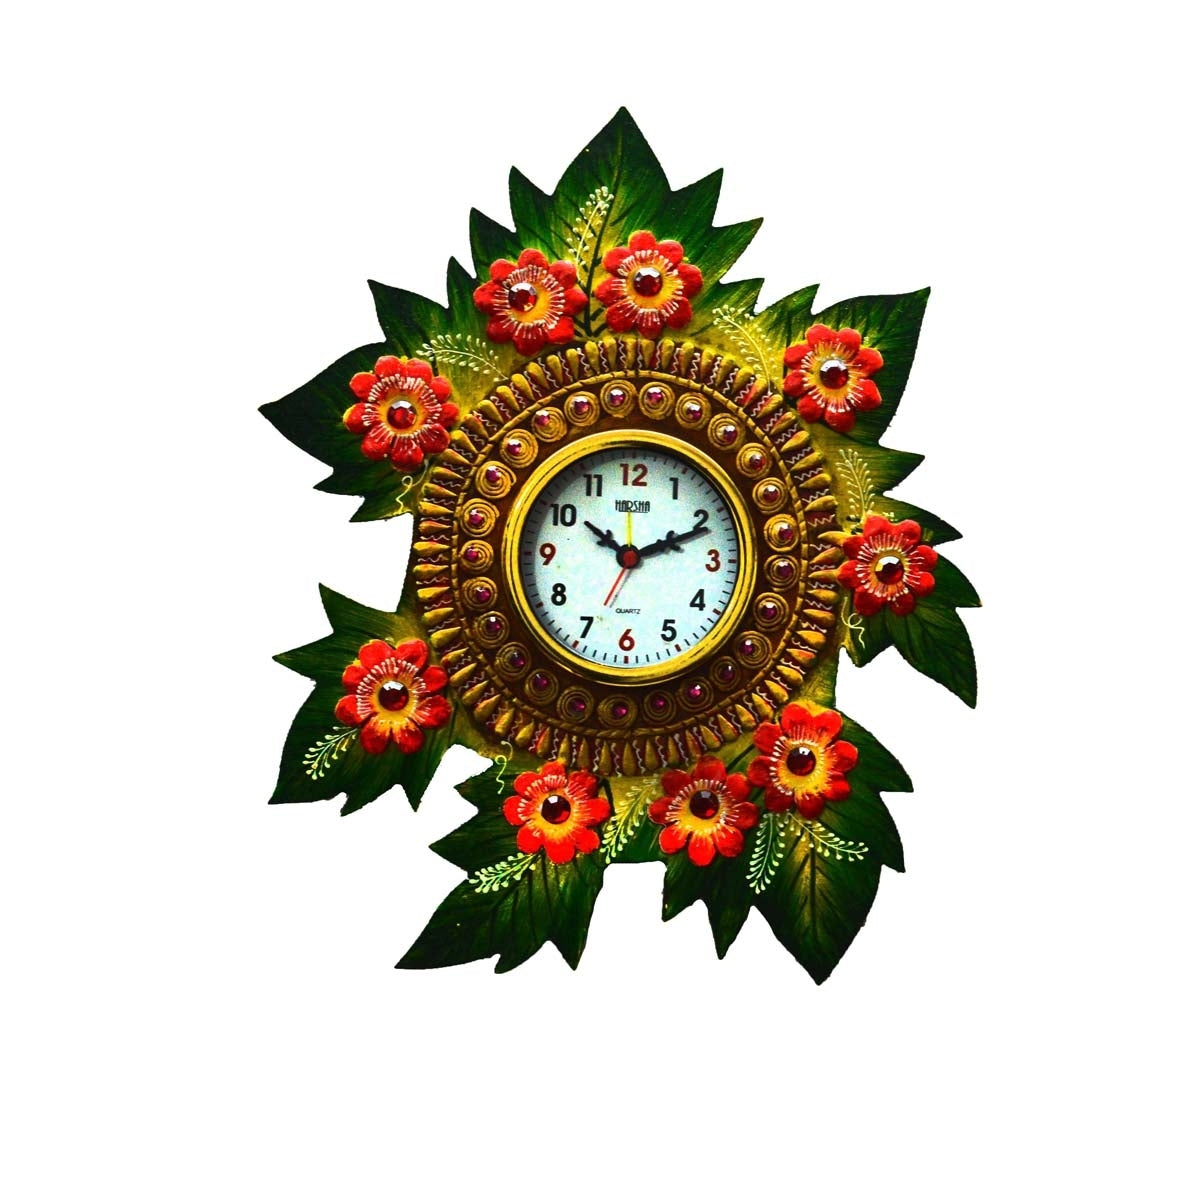 Papier-Mache Floral Handcrafted Wall Clock 1